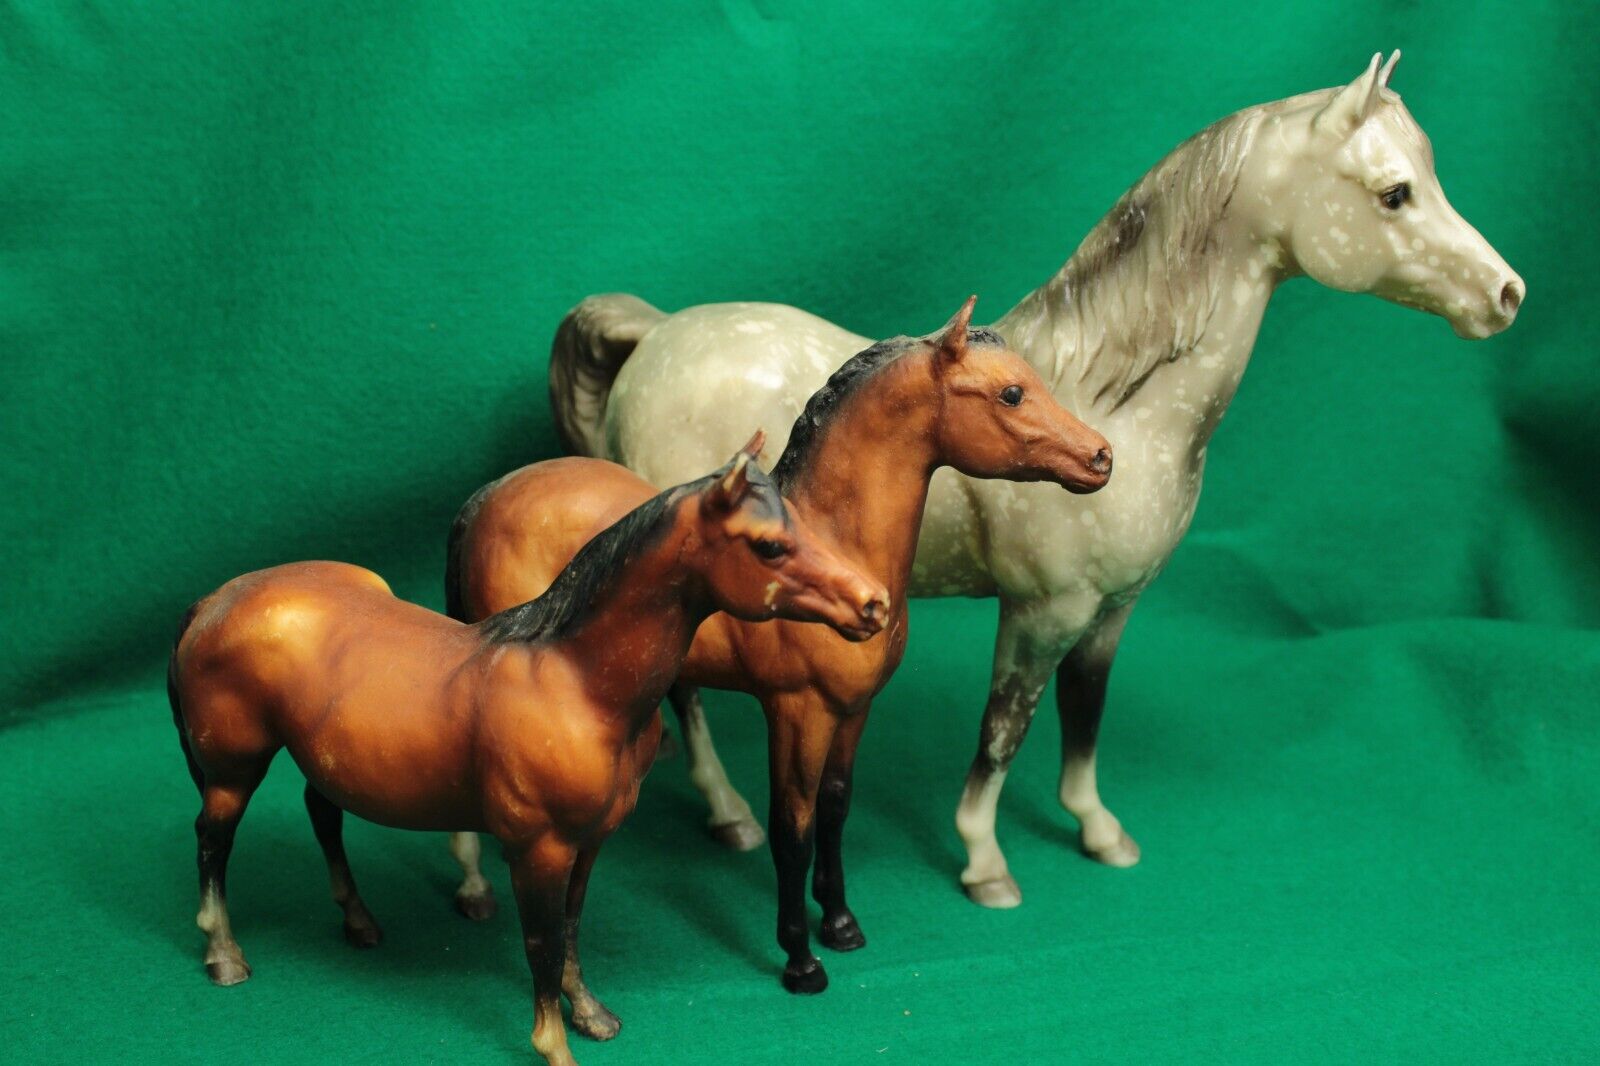 Lot of 3 Breyer Molding Co. Horses USA some wear